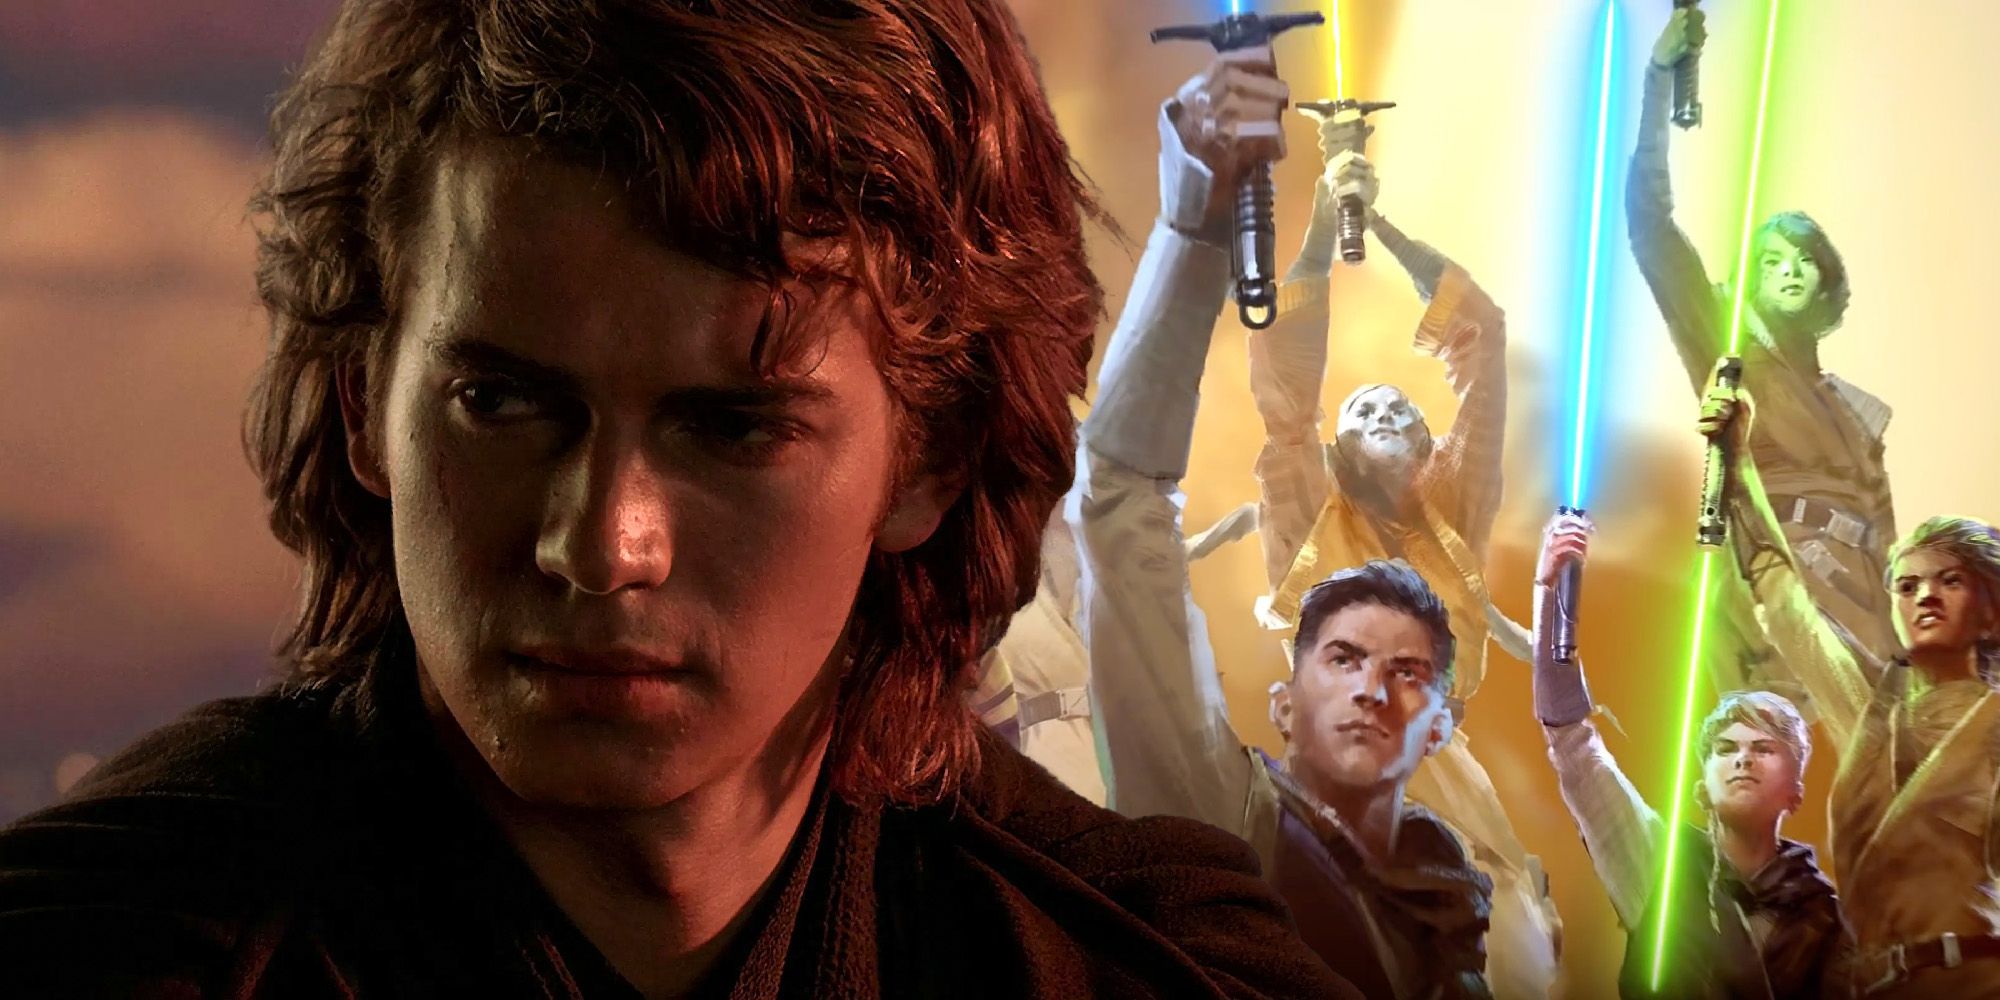 Star Wars Is Revealing The Dark Truth Of The Chosen One Prophecy